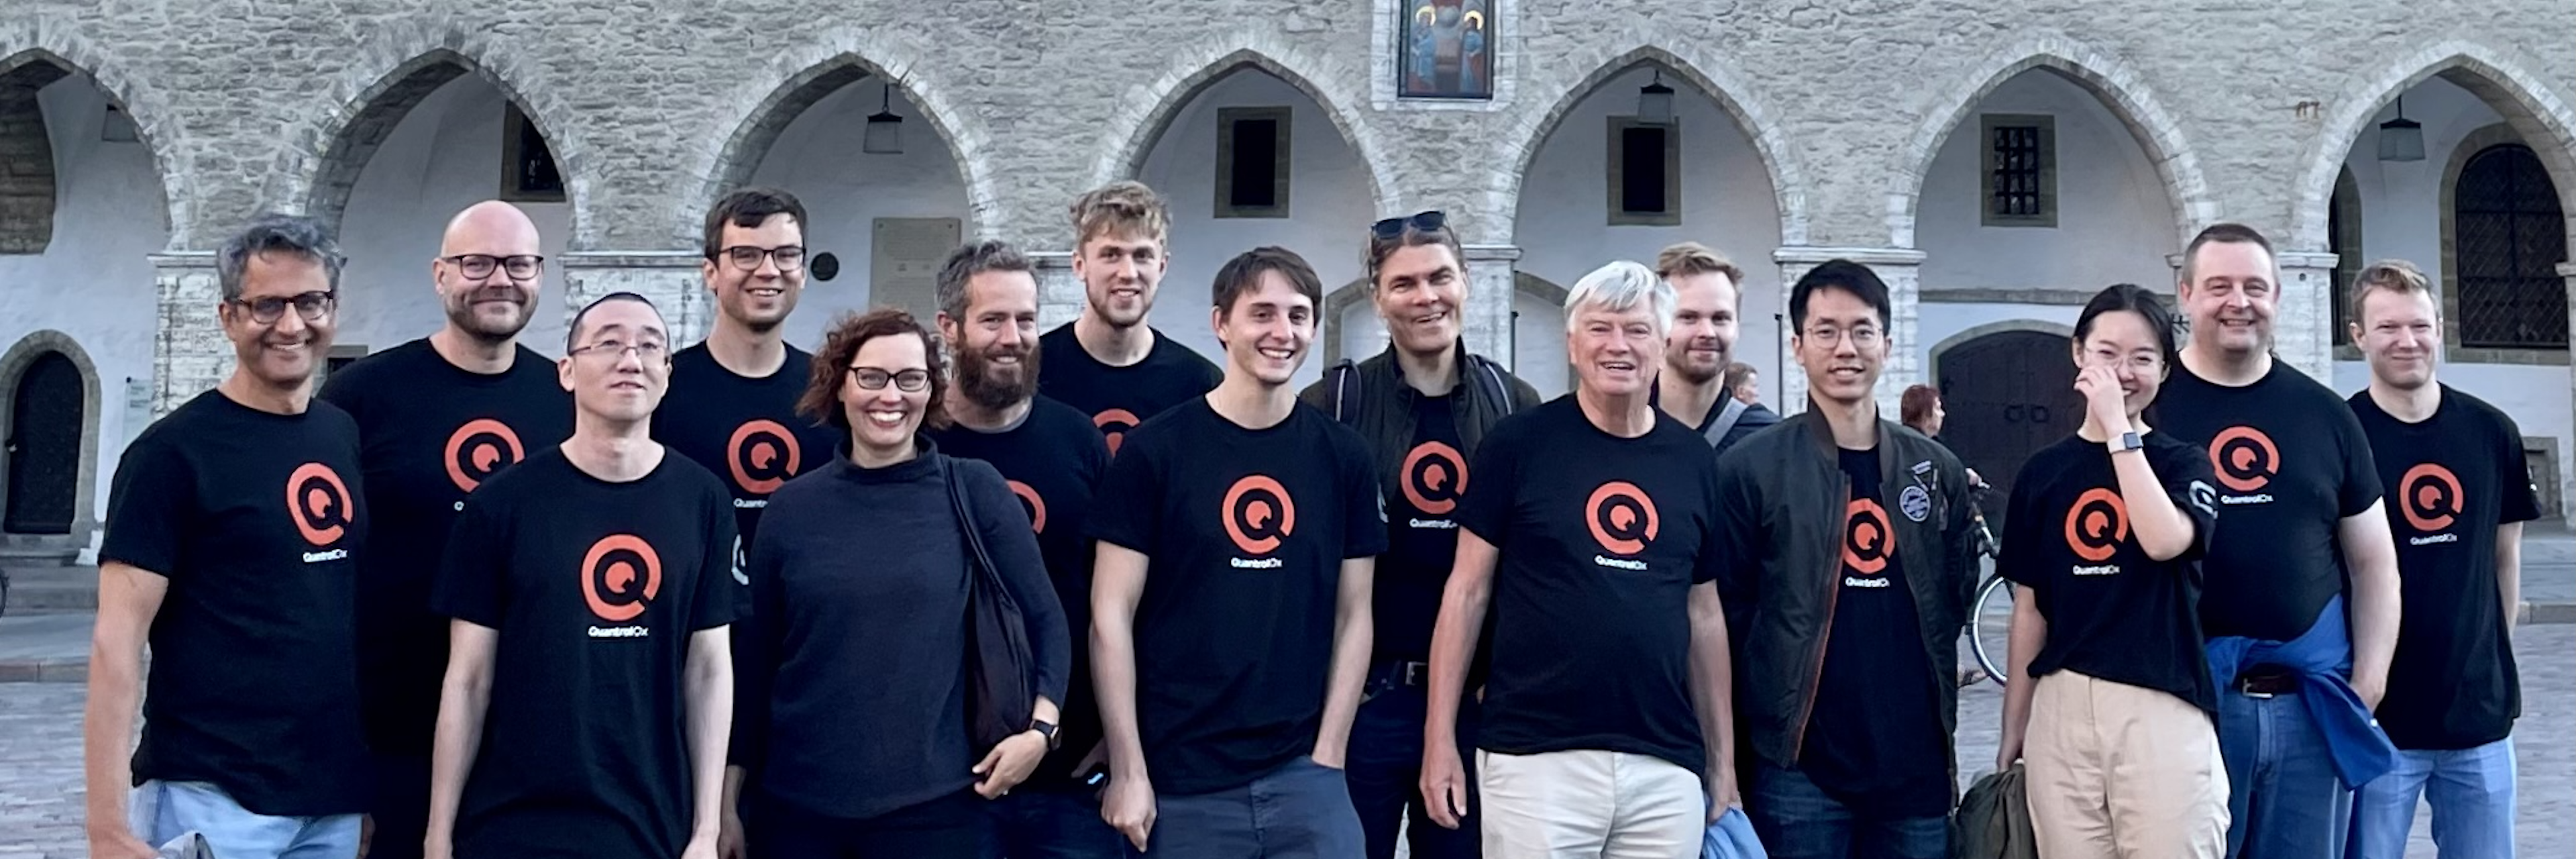 An image of the QuantrolOx team